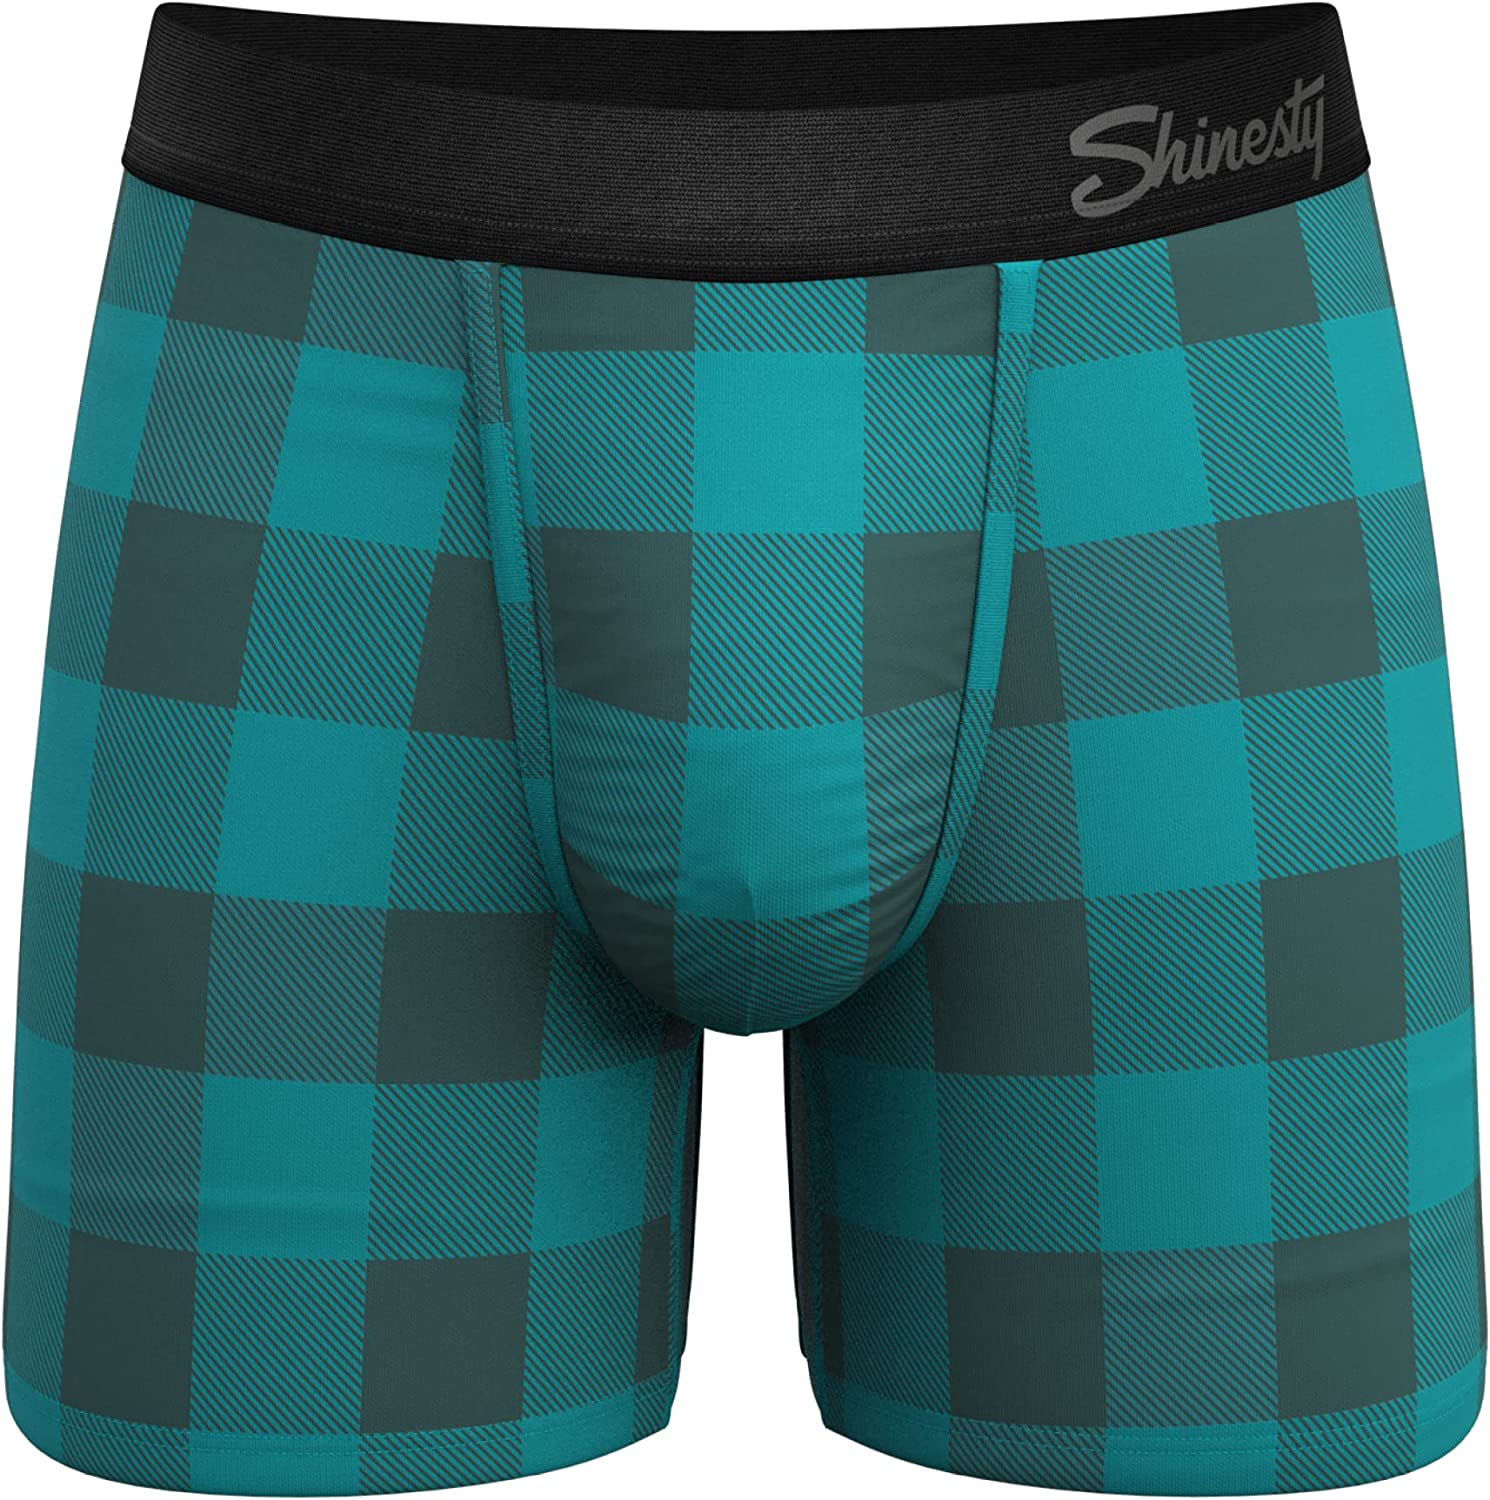 Shinesty Men's Pouch Boxer Briefs - Micro Modal Ball Hammock Underwear with  Fly